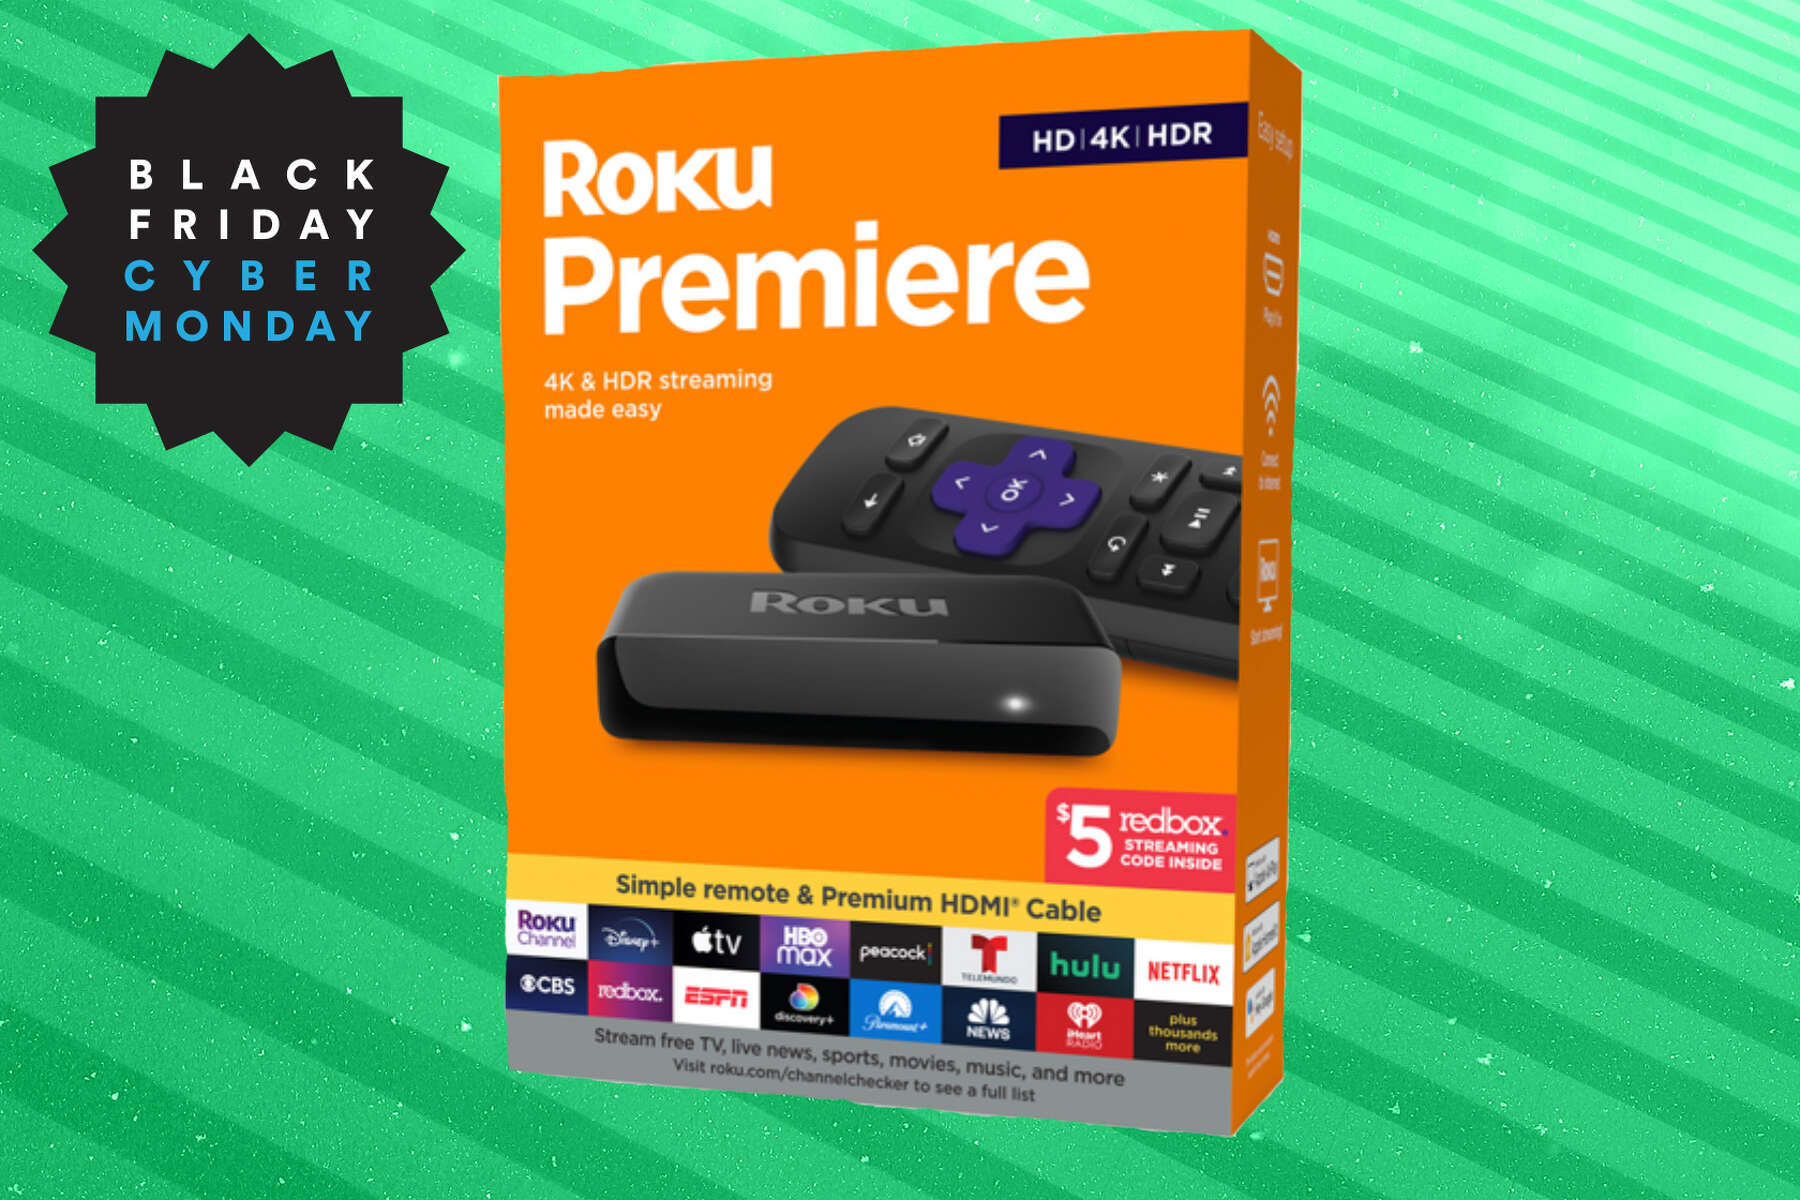 Roku Premiere | 4K/HDR Streaming Media Player with Premium High Speed HDMI  Cable and Simple Remote